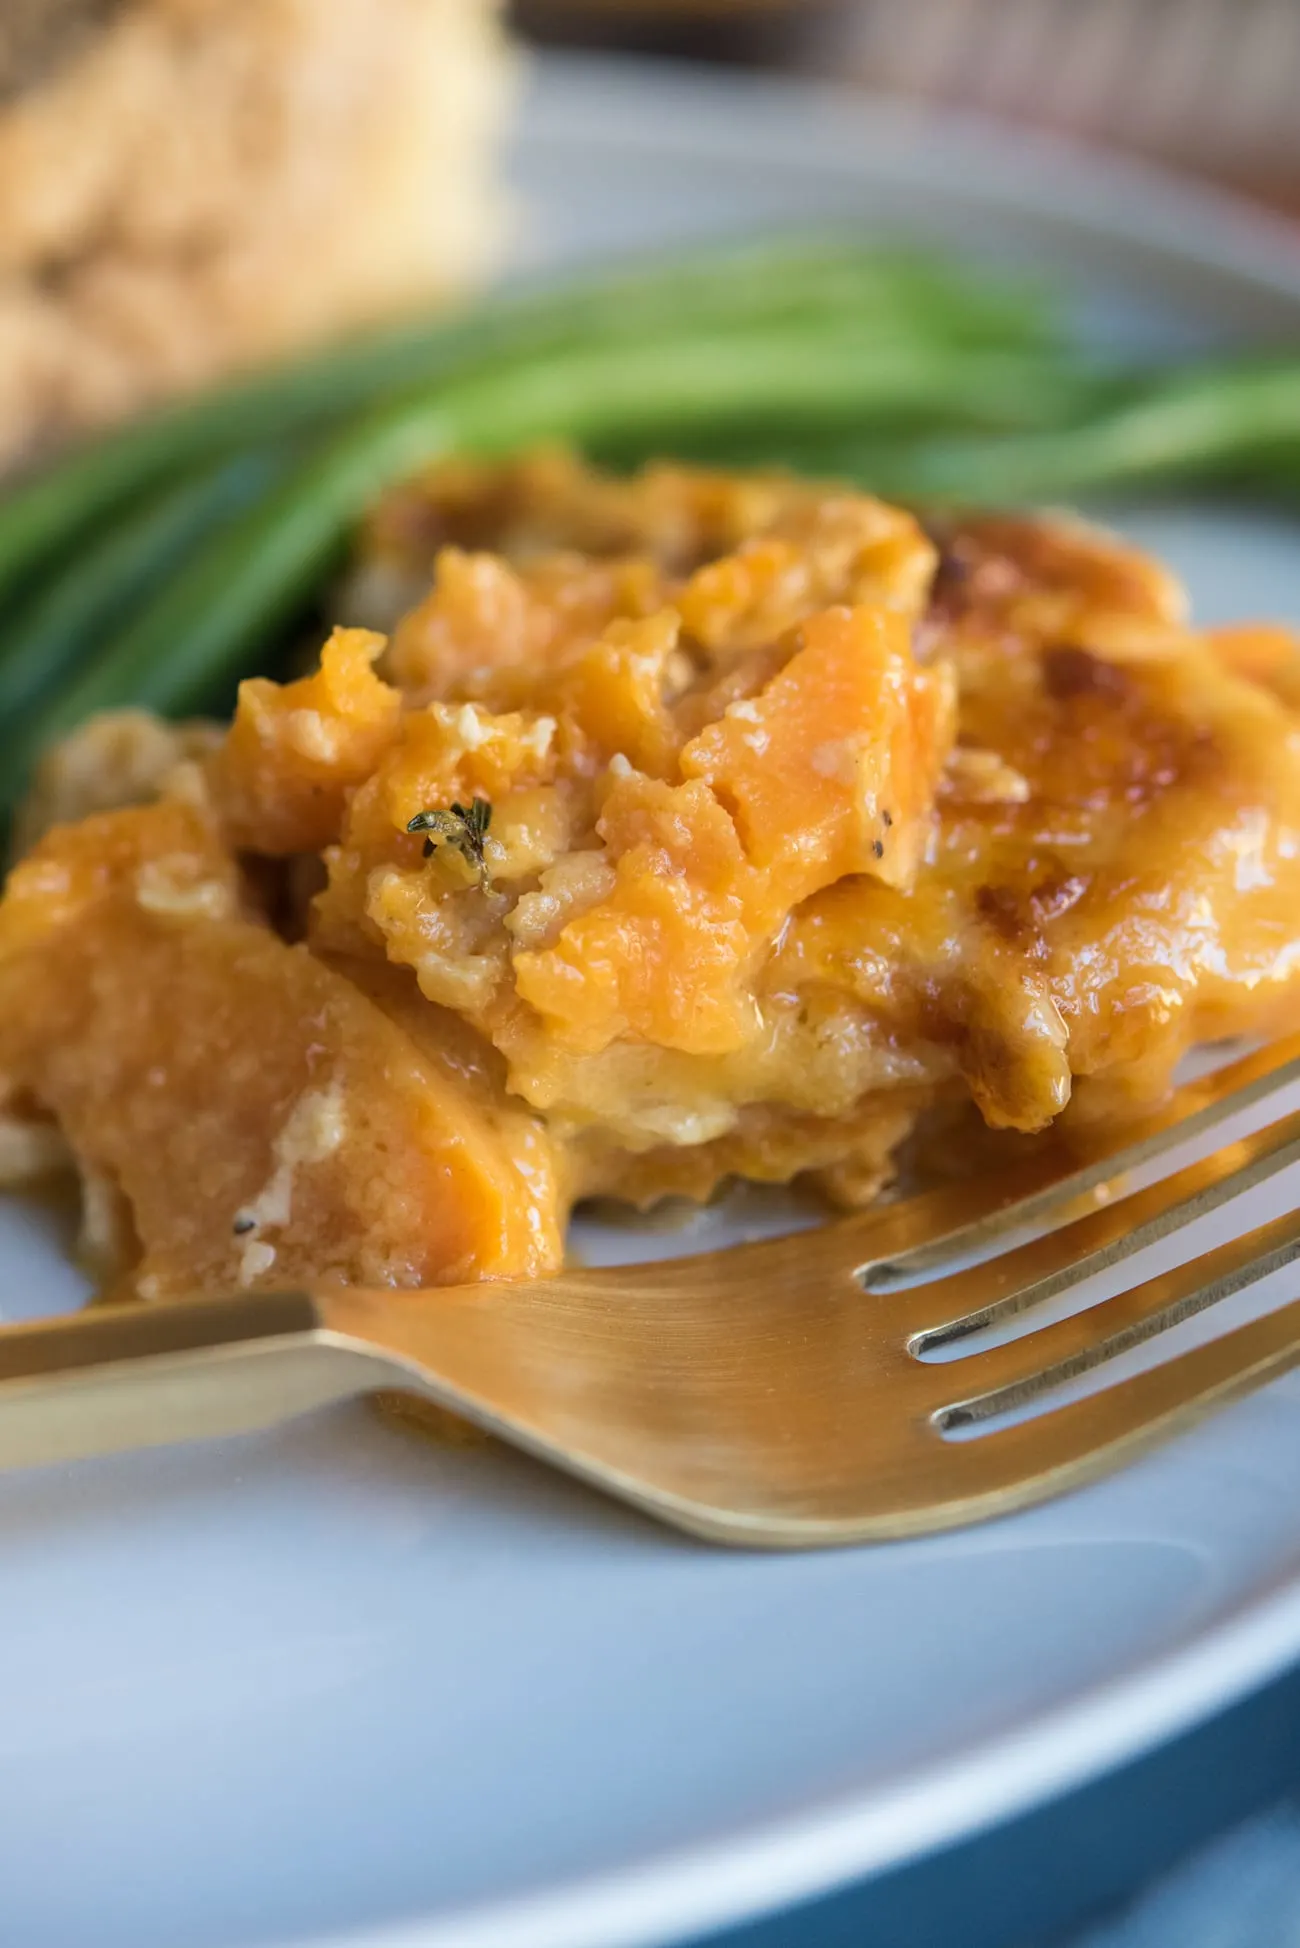 Best Thanksgiving Side Dishes - Scalloped Sweet Potatoes Recipe | Entertaining tips, Thanksgiving hosting tips, Thanksgiving menu ideas from entertaining blog @cydconverse